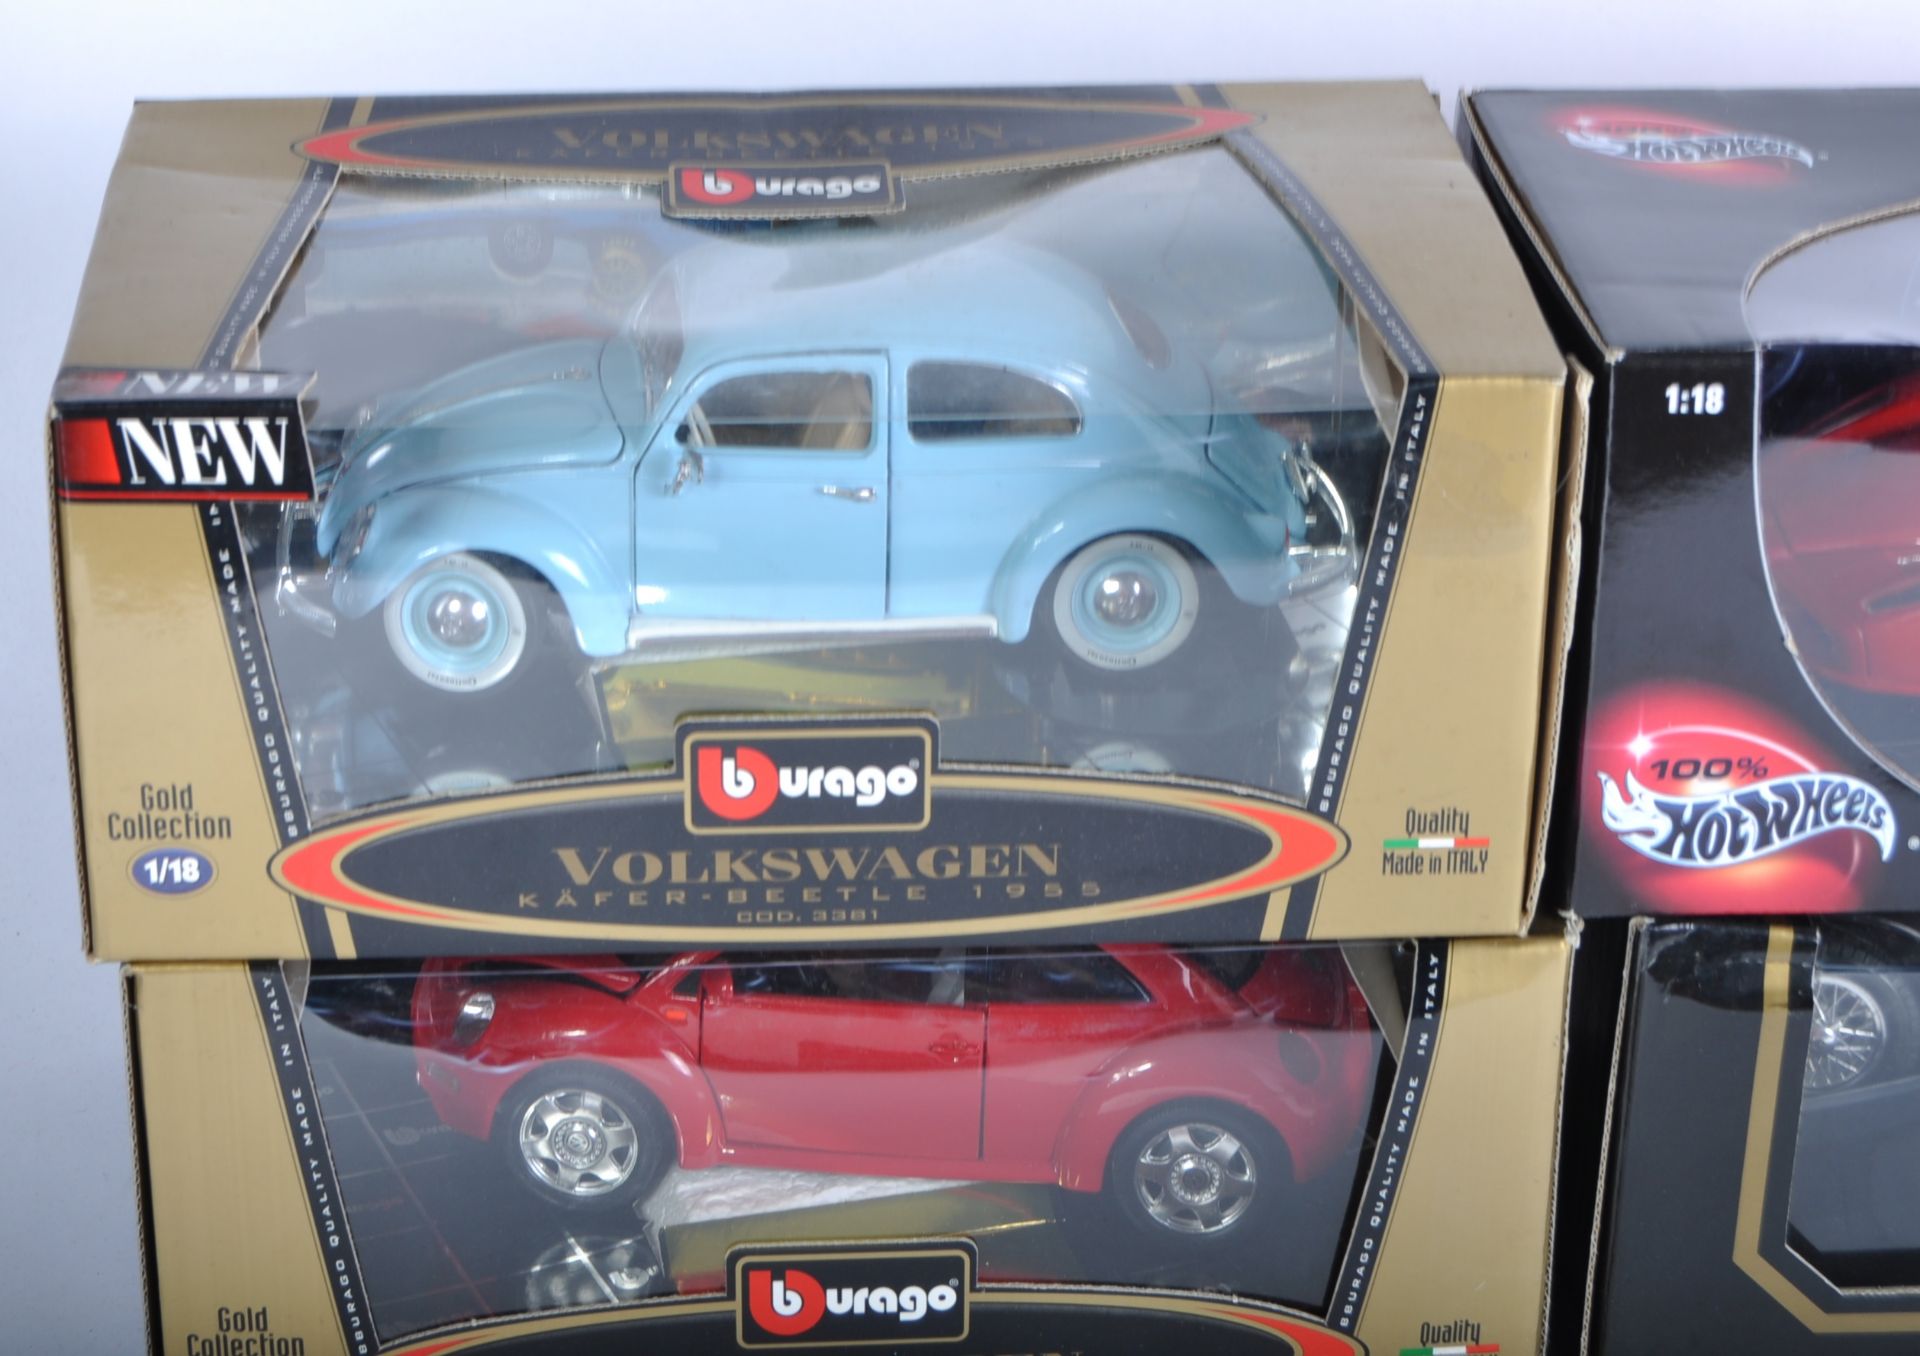 COLLECTION OF 1/18 SCALE DIECAST MODEL CARS - Image 5 of 5